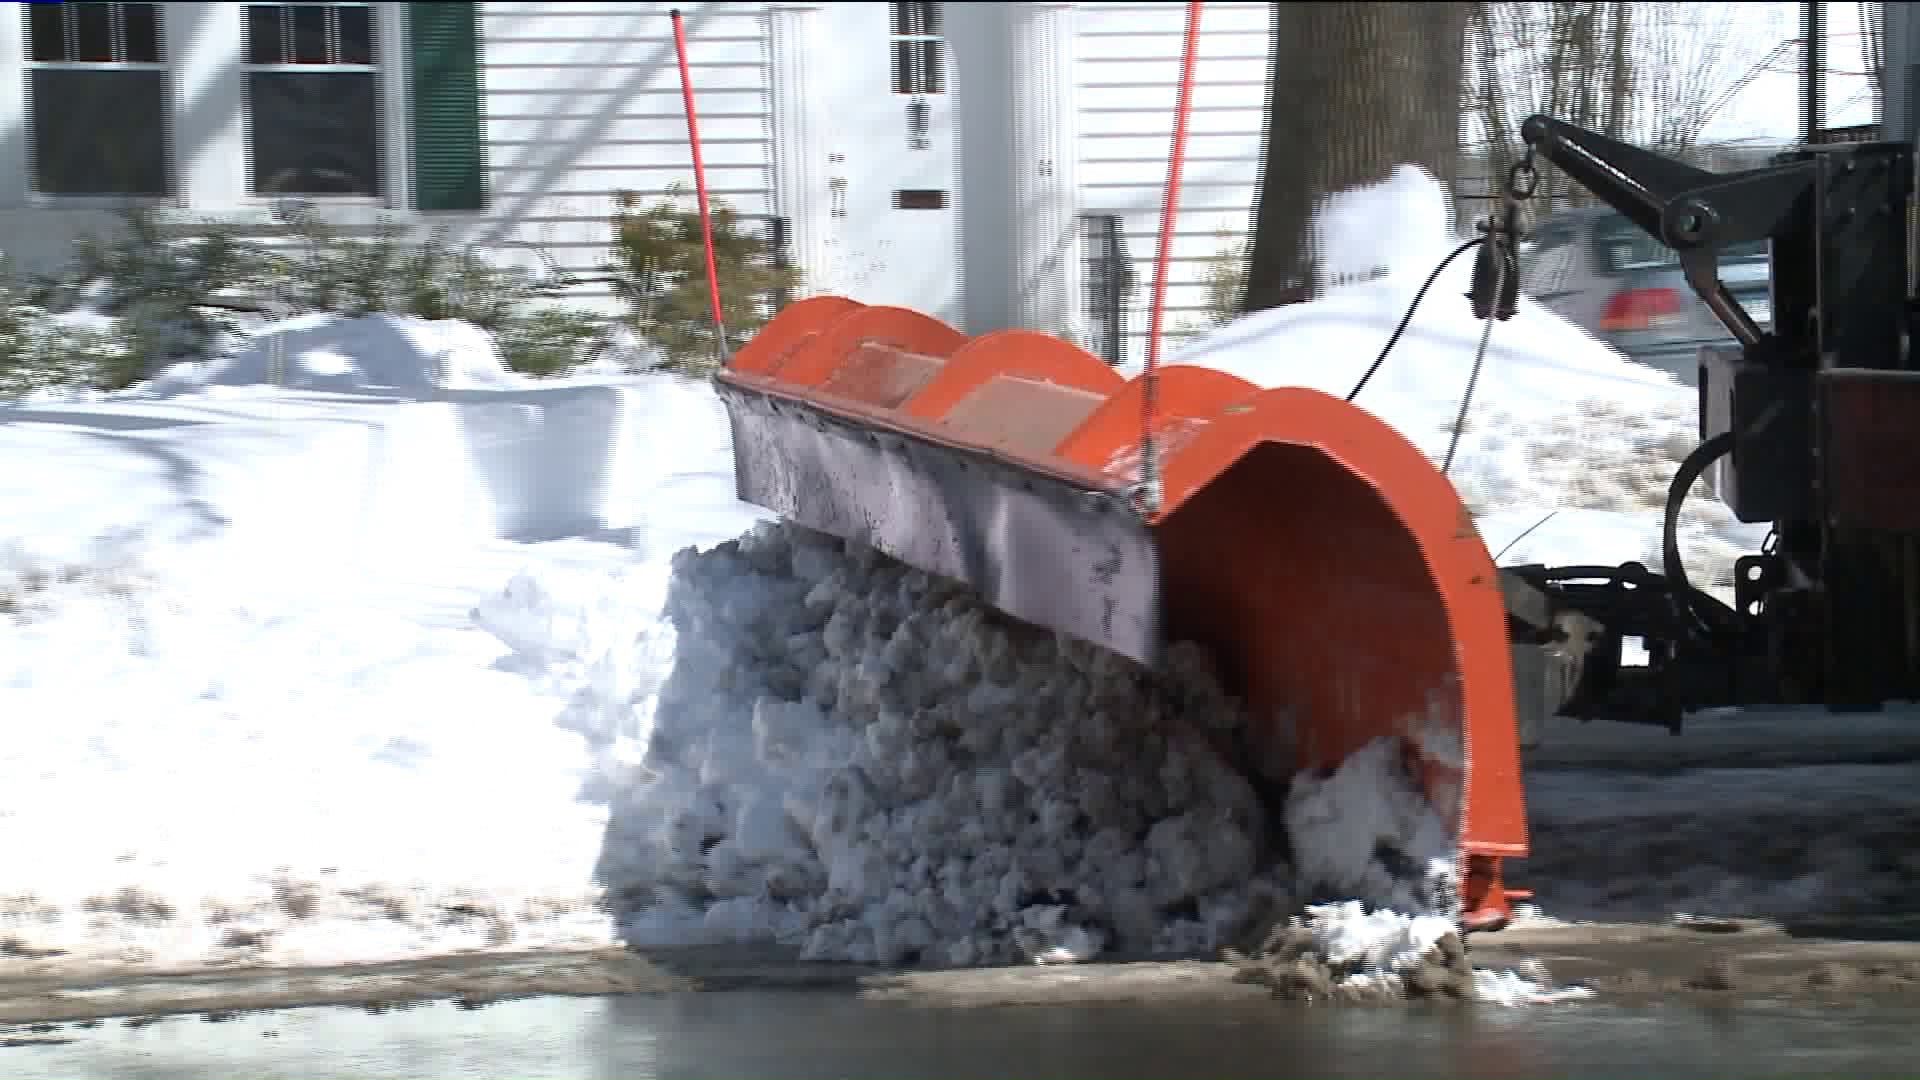 Waterbury crews still working to clean messy streets 2 days after storm